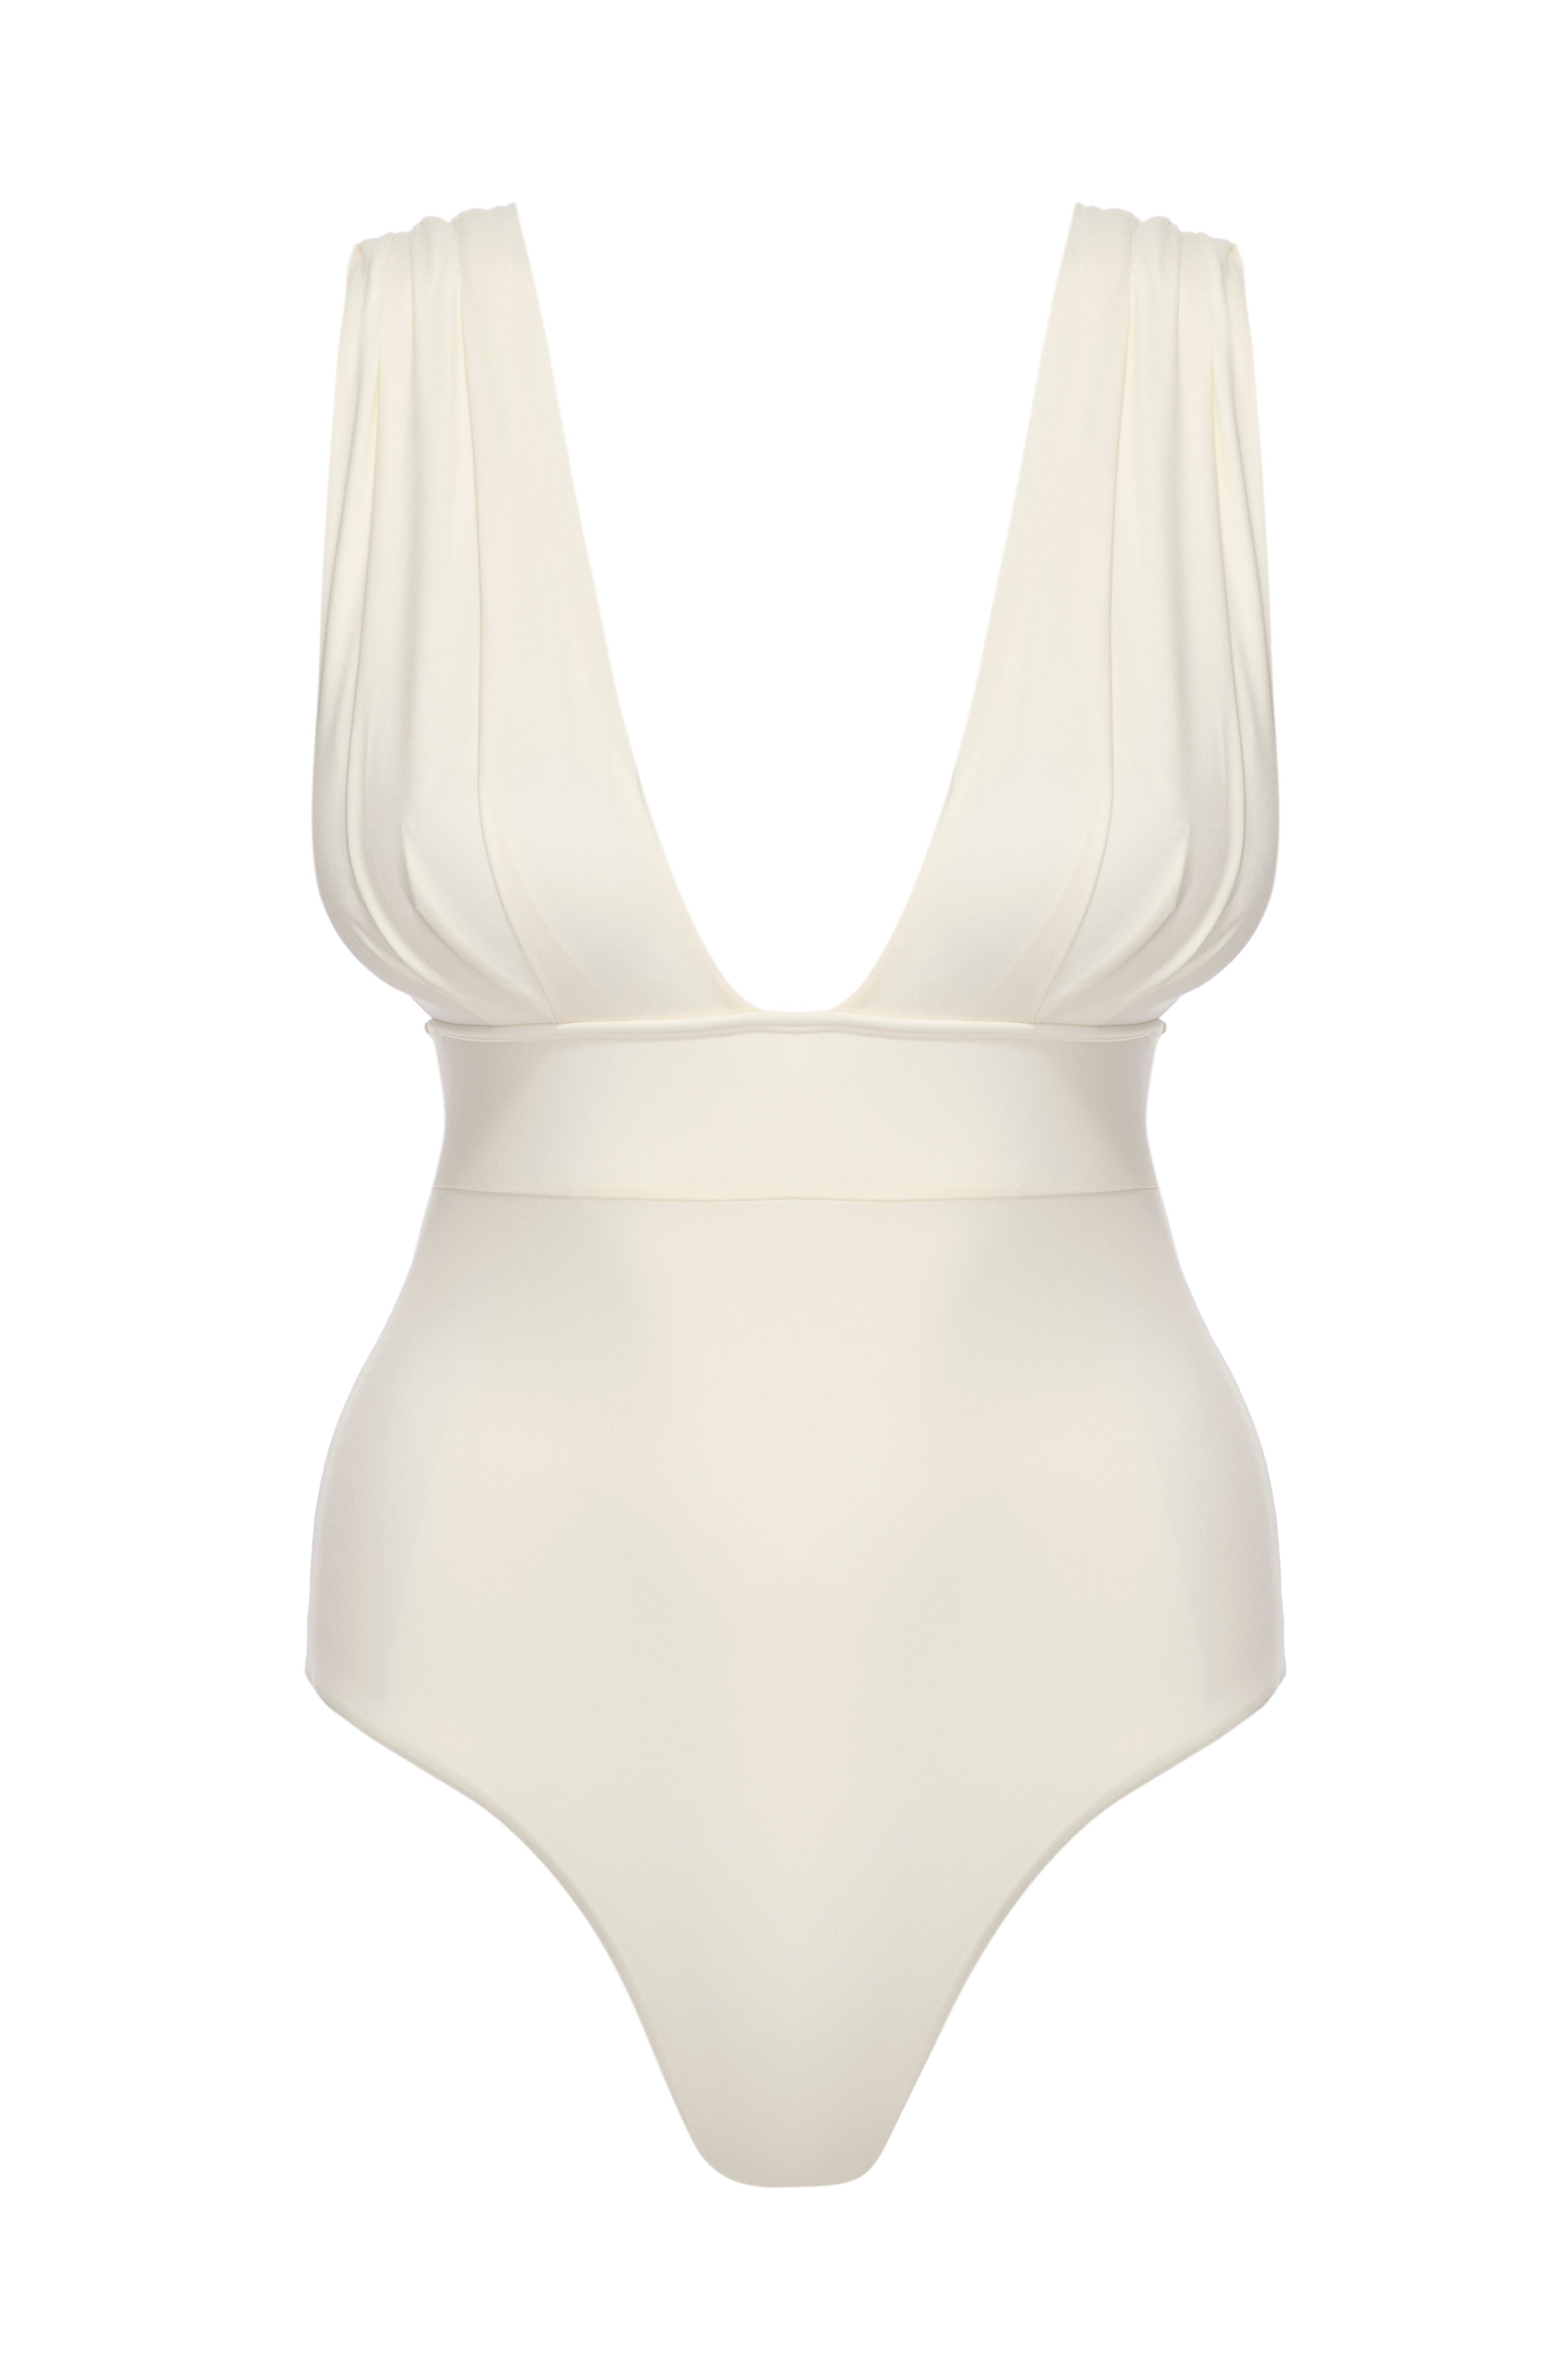 Full Size Two-Tone Plunge One-Piece Swimsuit